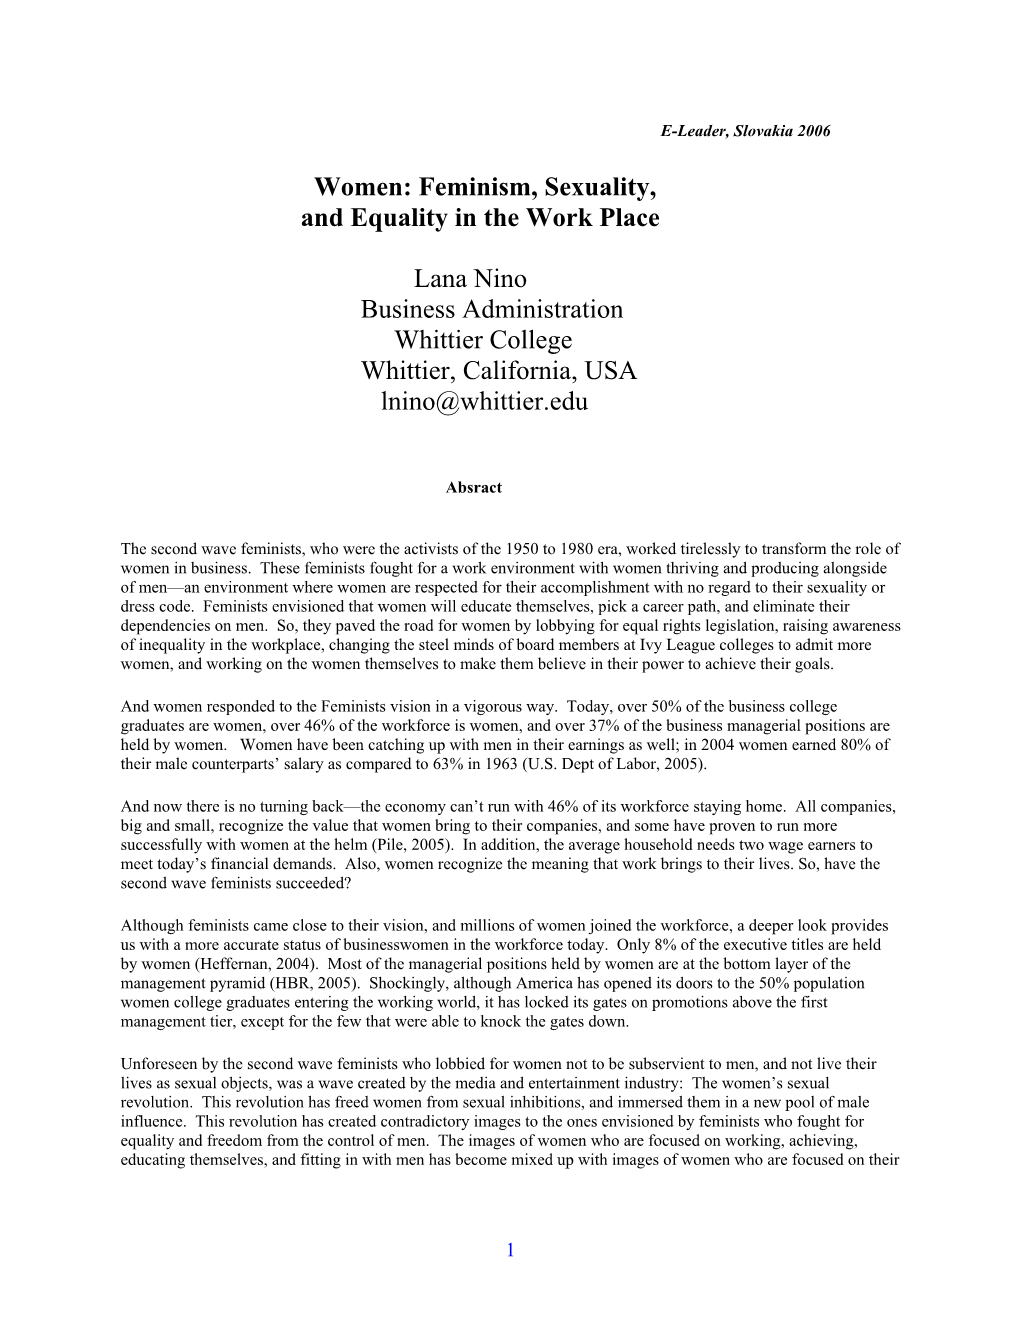 Women: Feminism, Sexuality, and Equality in the Work Place Lana